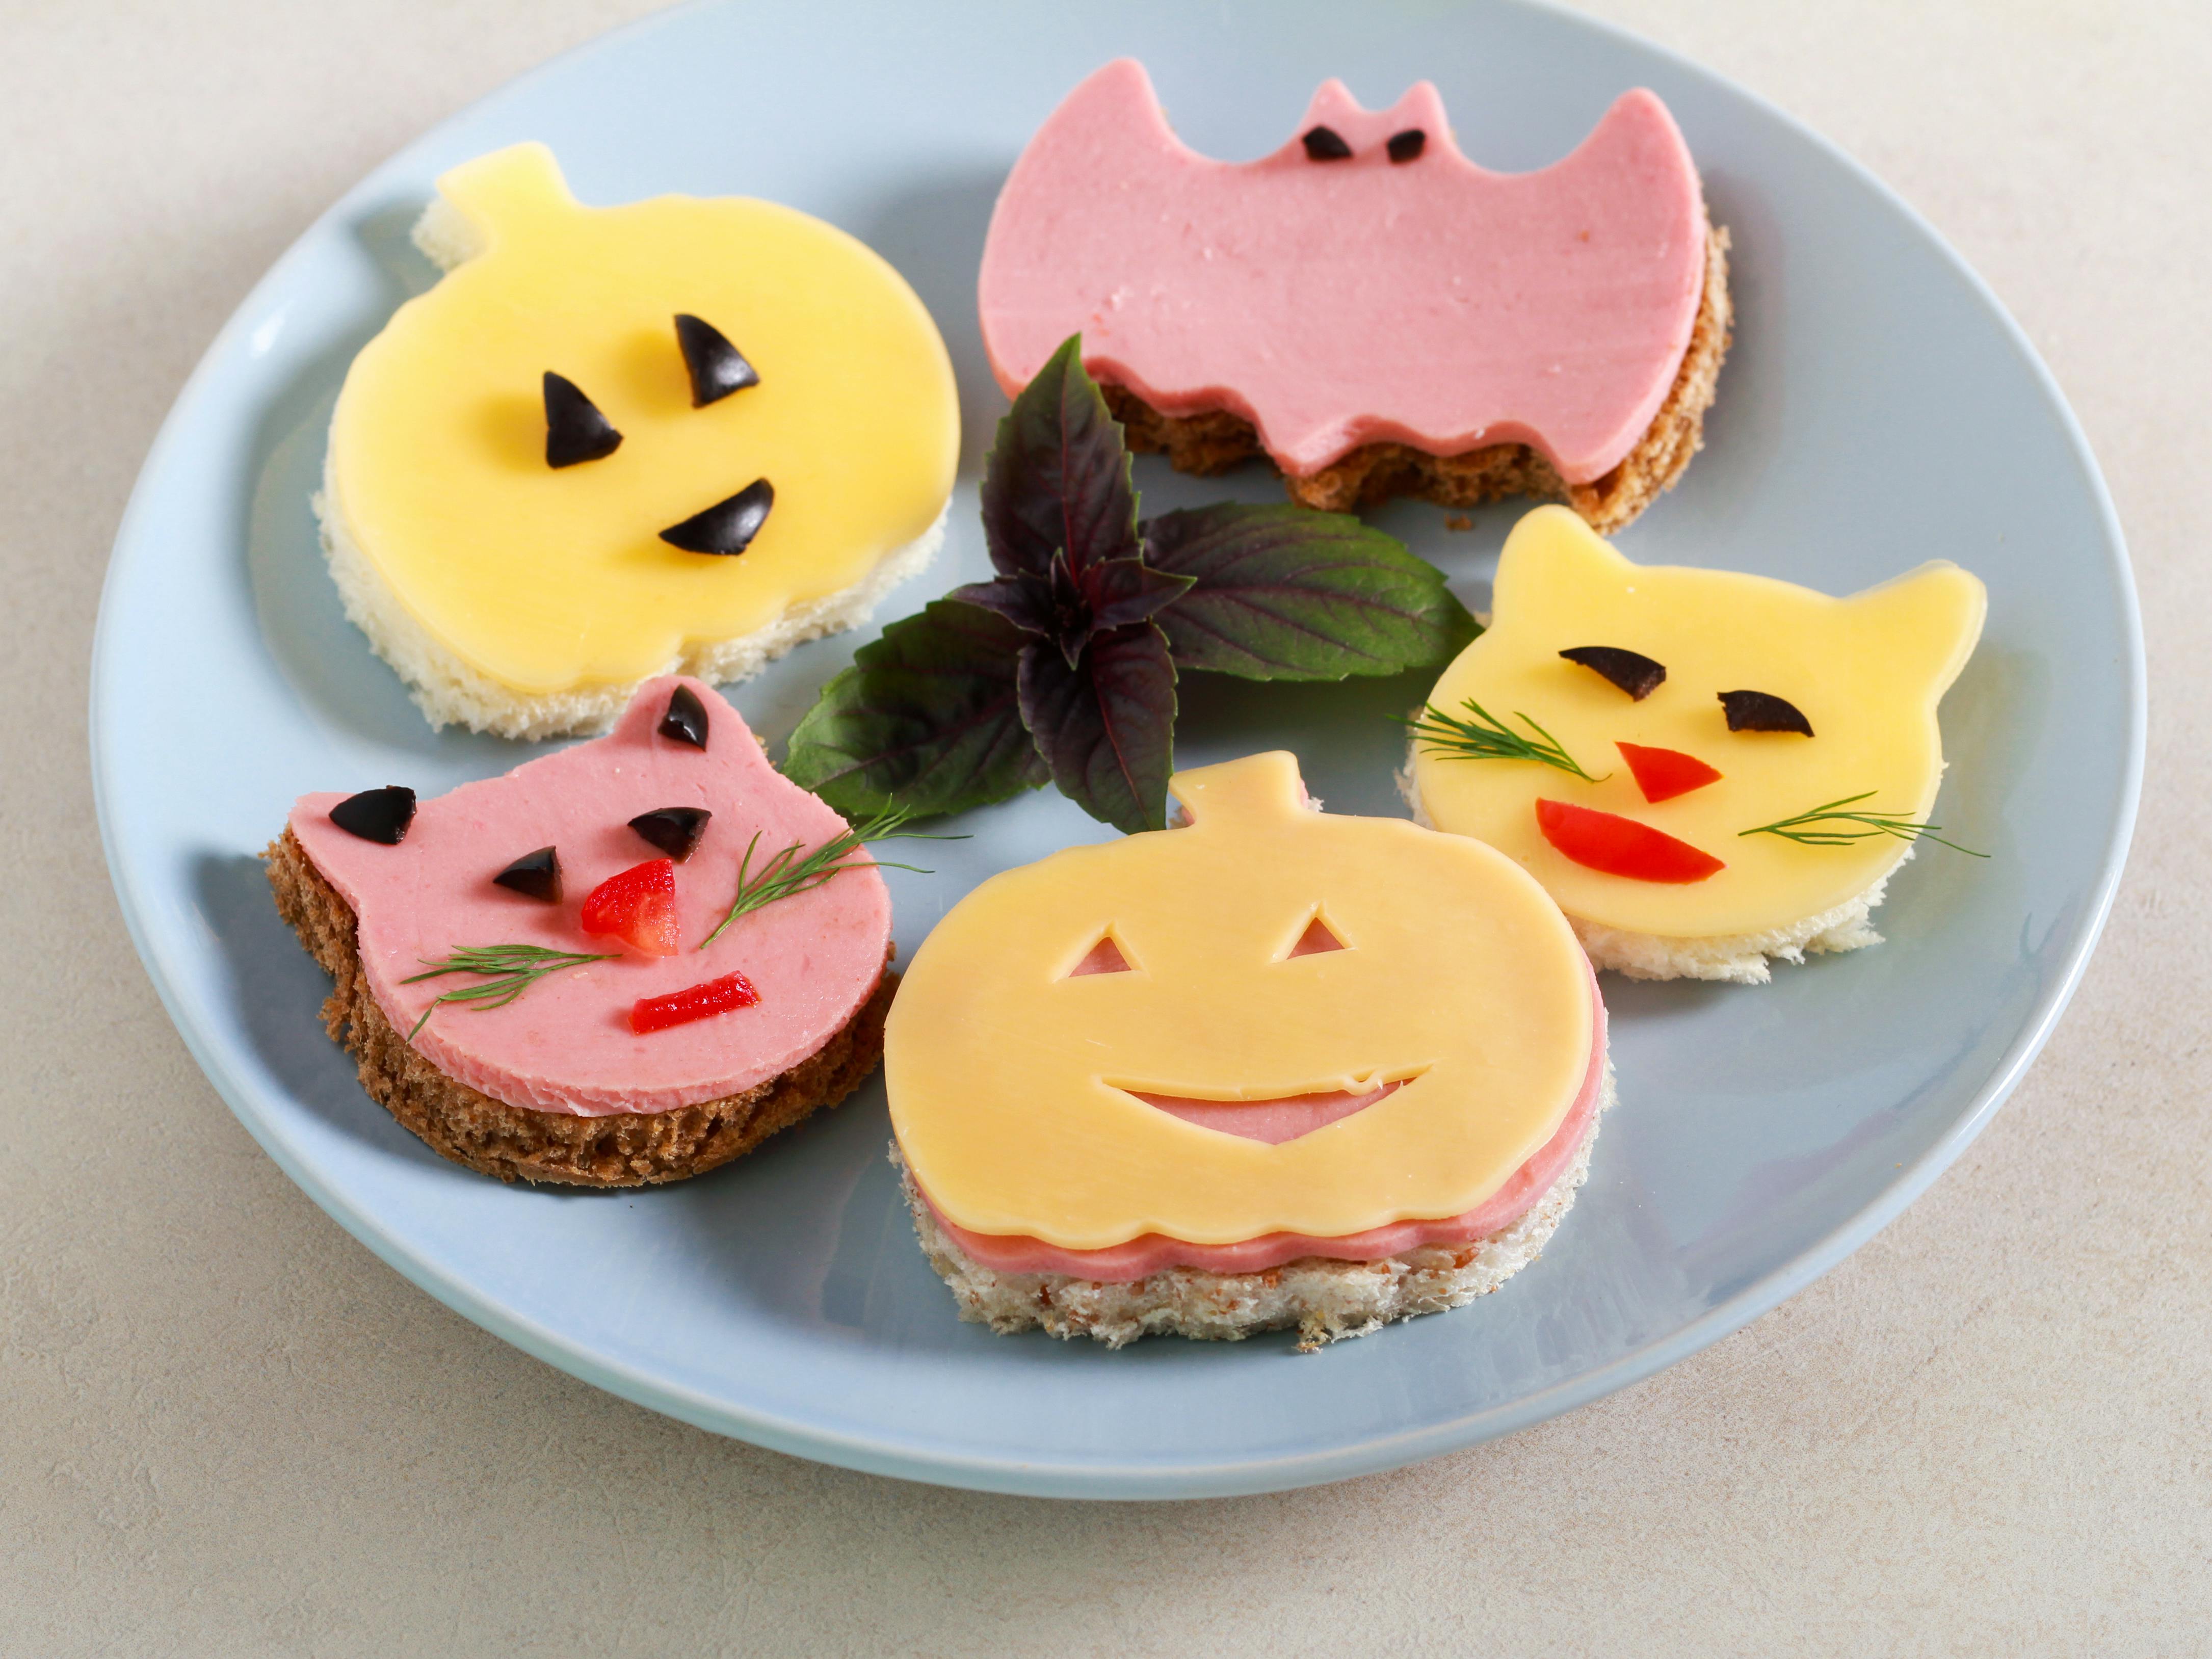 A plate of open-faced deli sandwiches with ham and cheese shaped like silly faces.